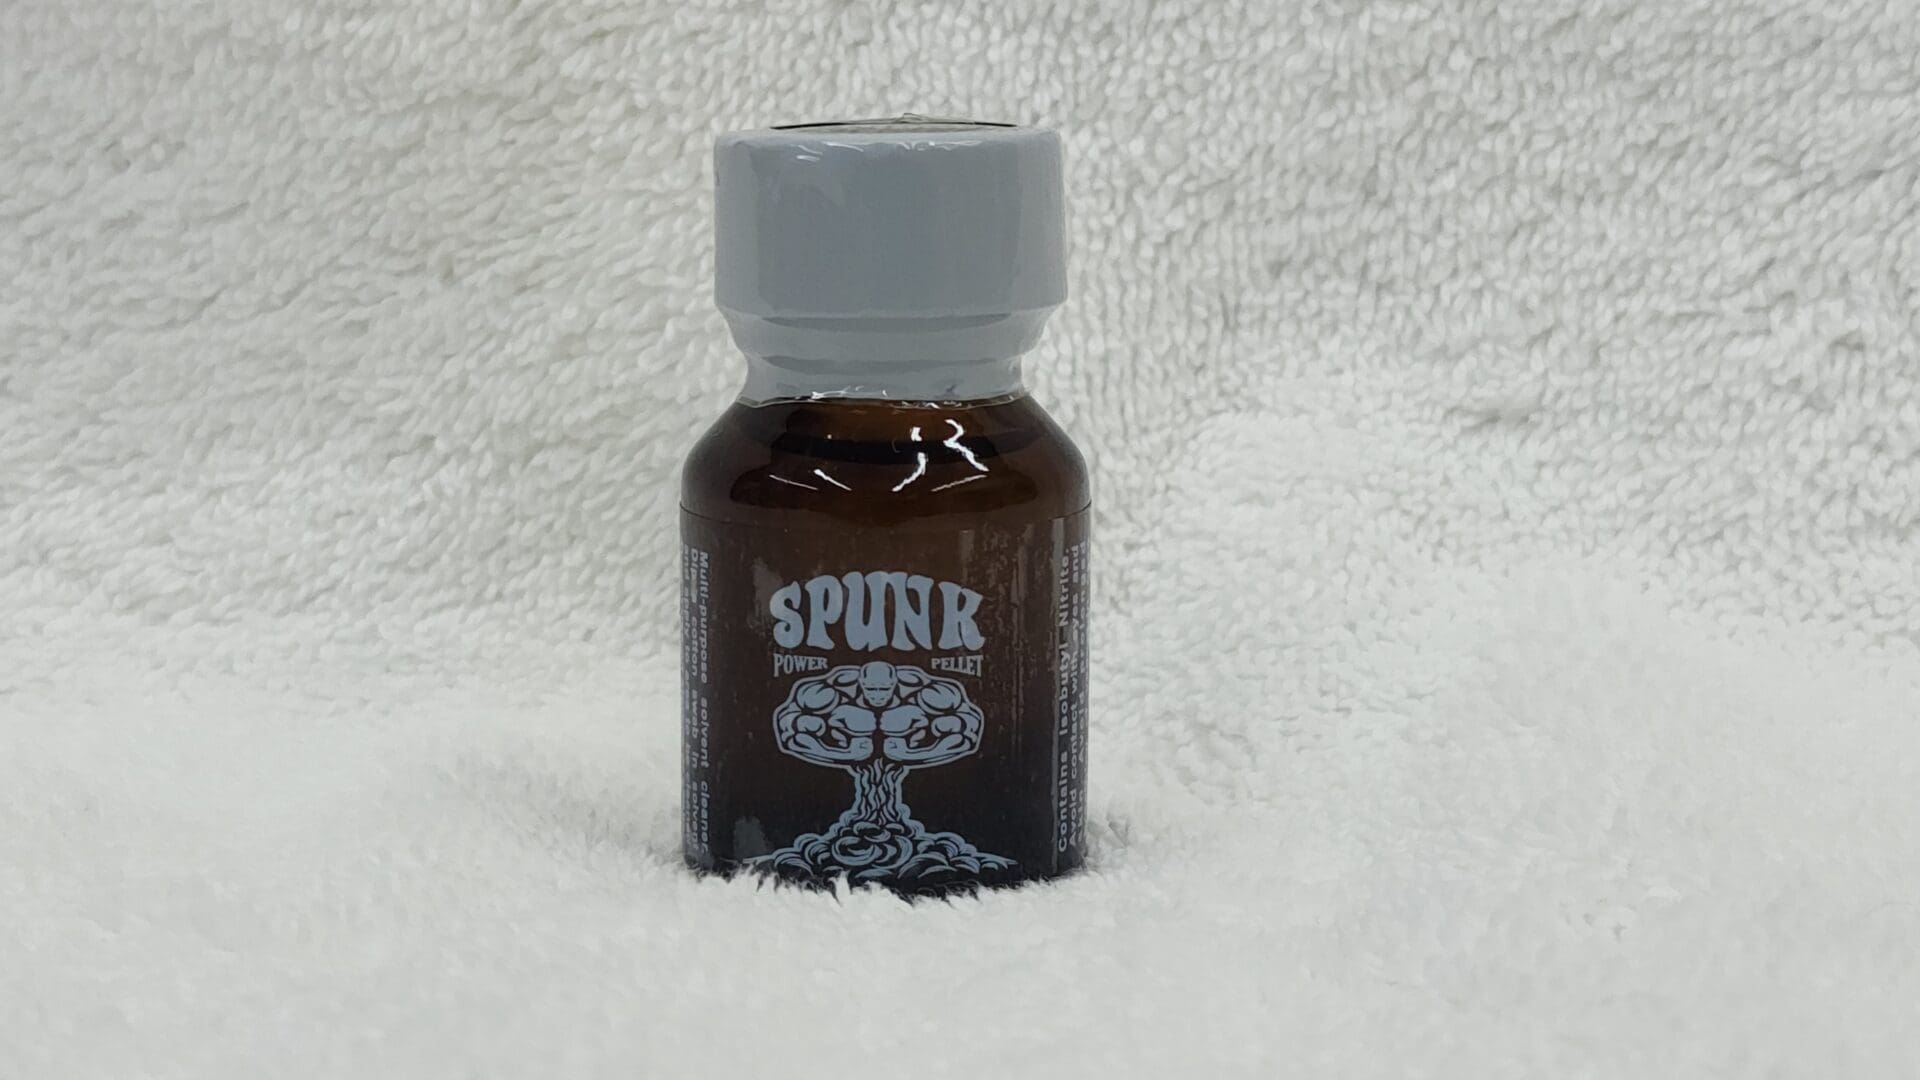 A small brown bottle of Spunk resting on a white textured surface.